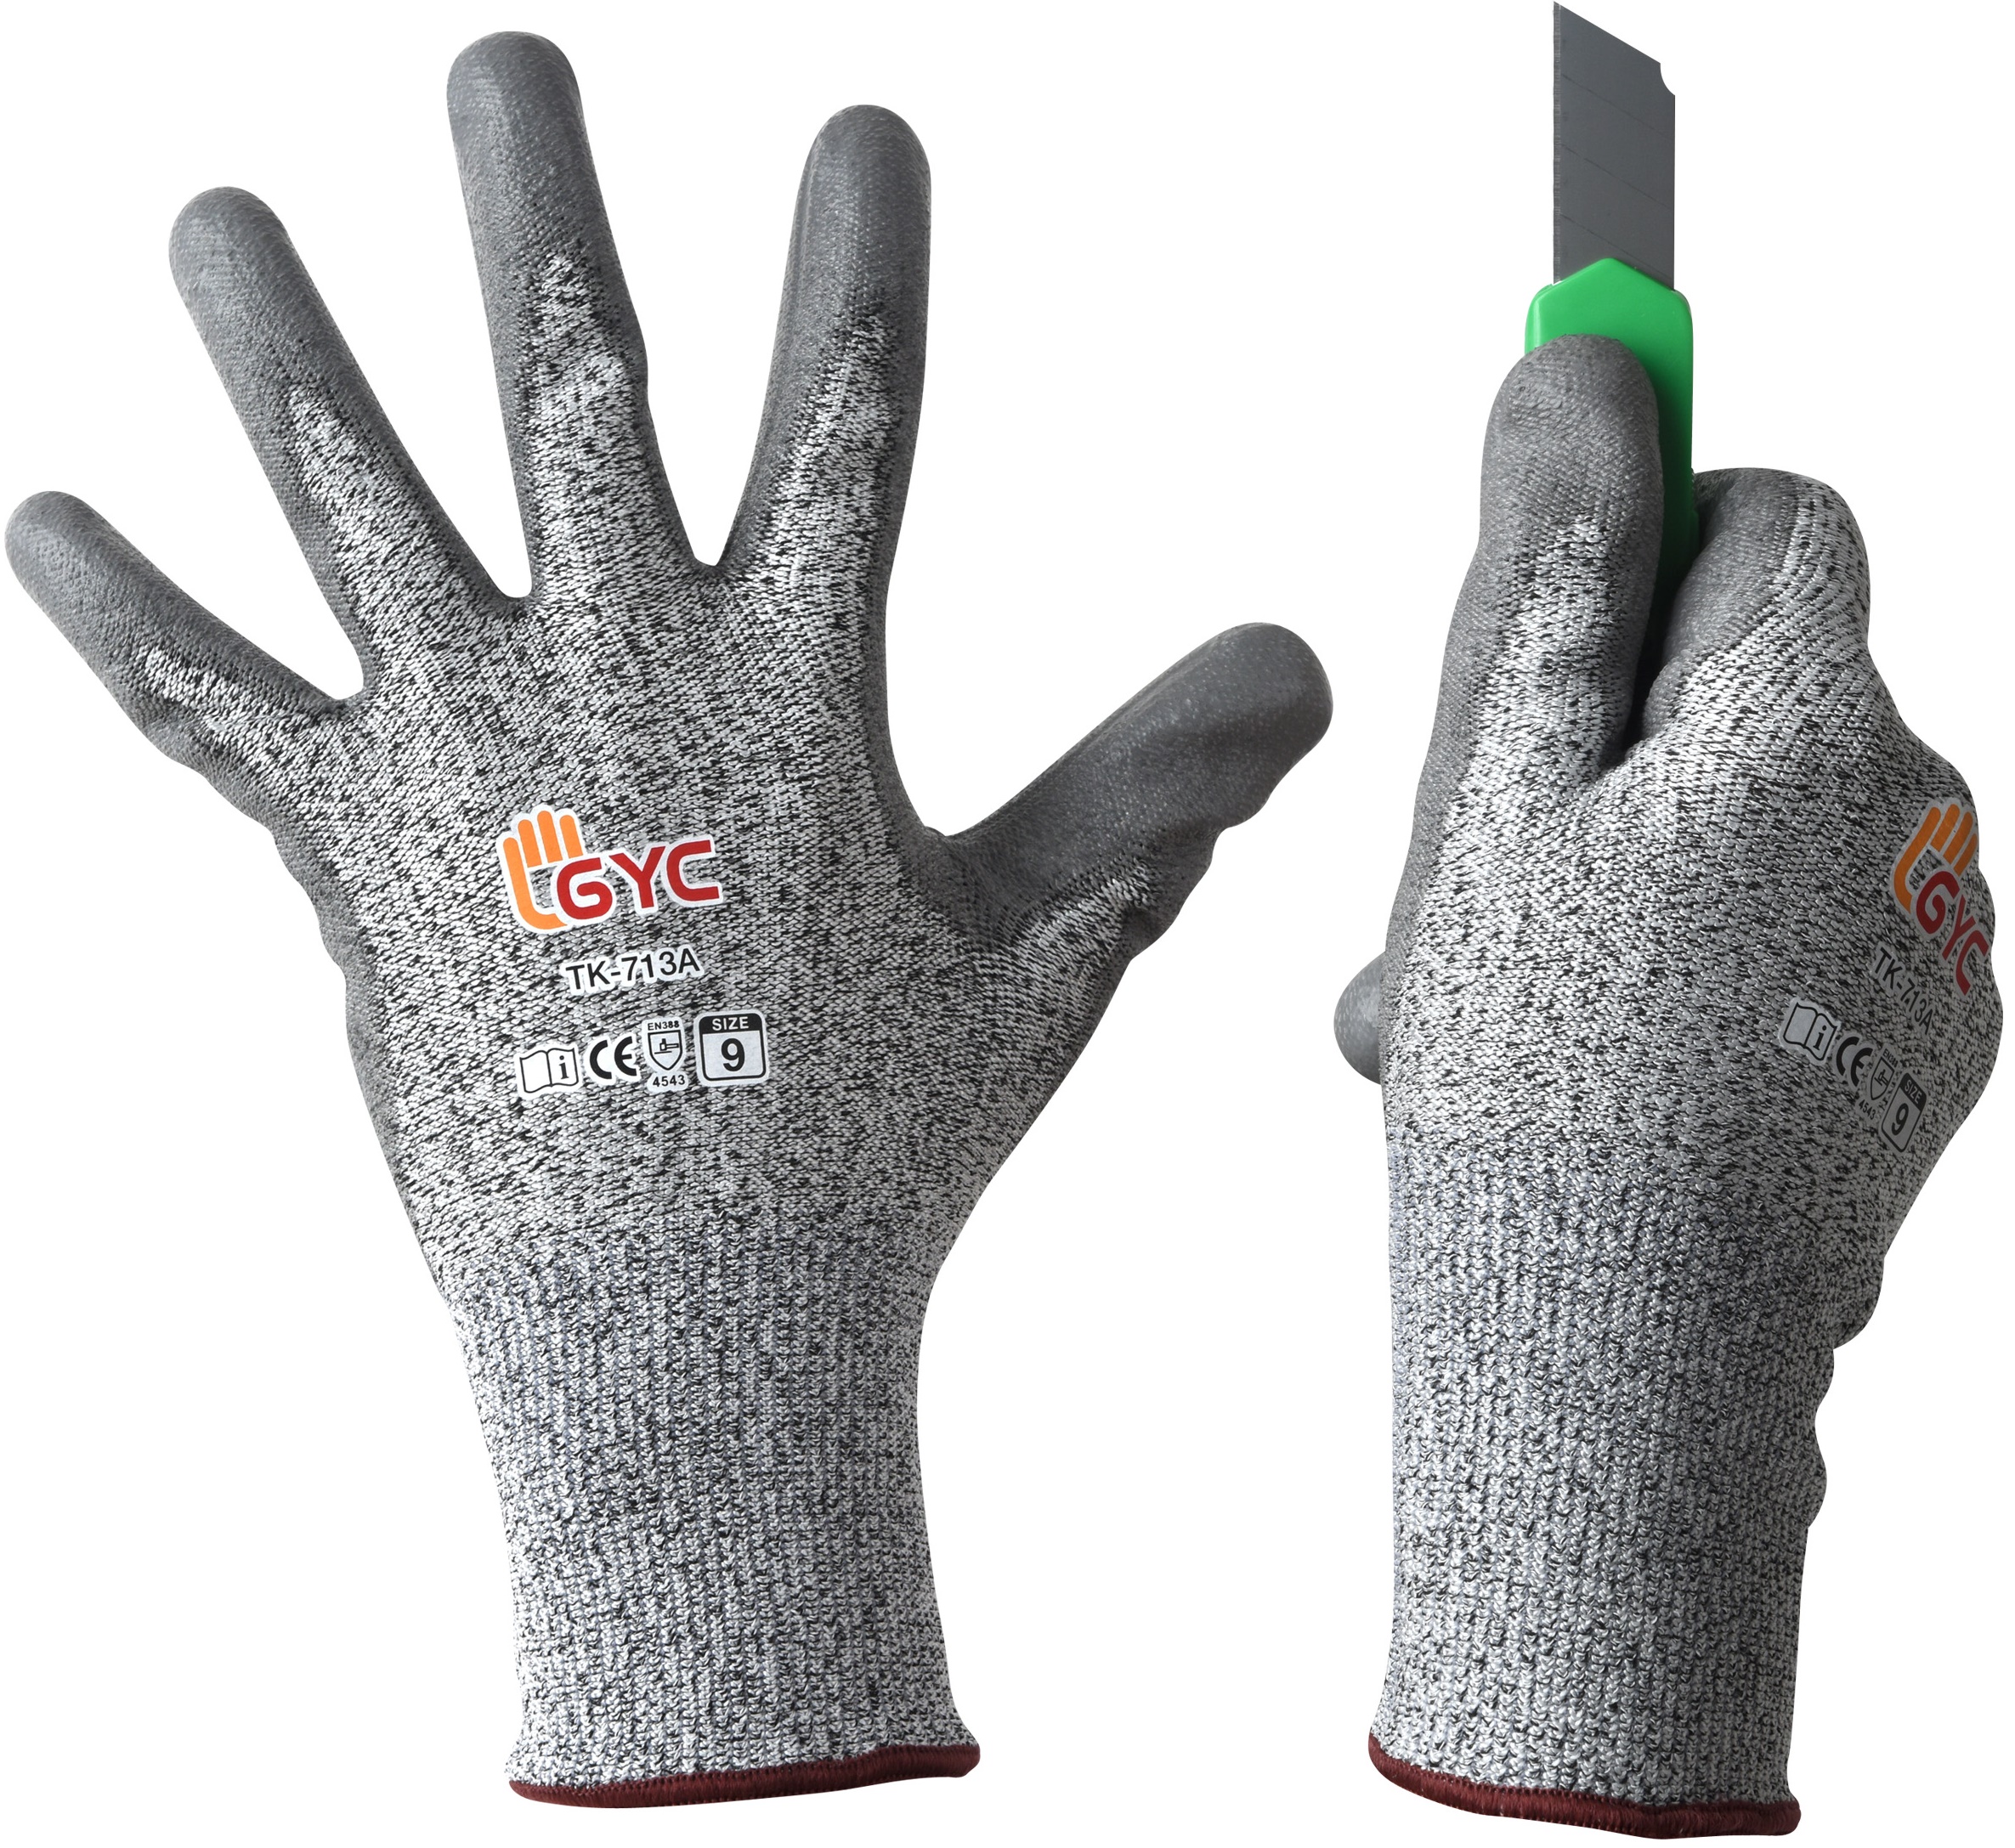 TK_713A _ Cut Resistant Gloves _ Level 5 Cut Protection Soft PU coated_